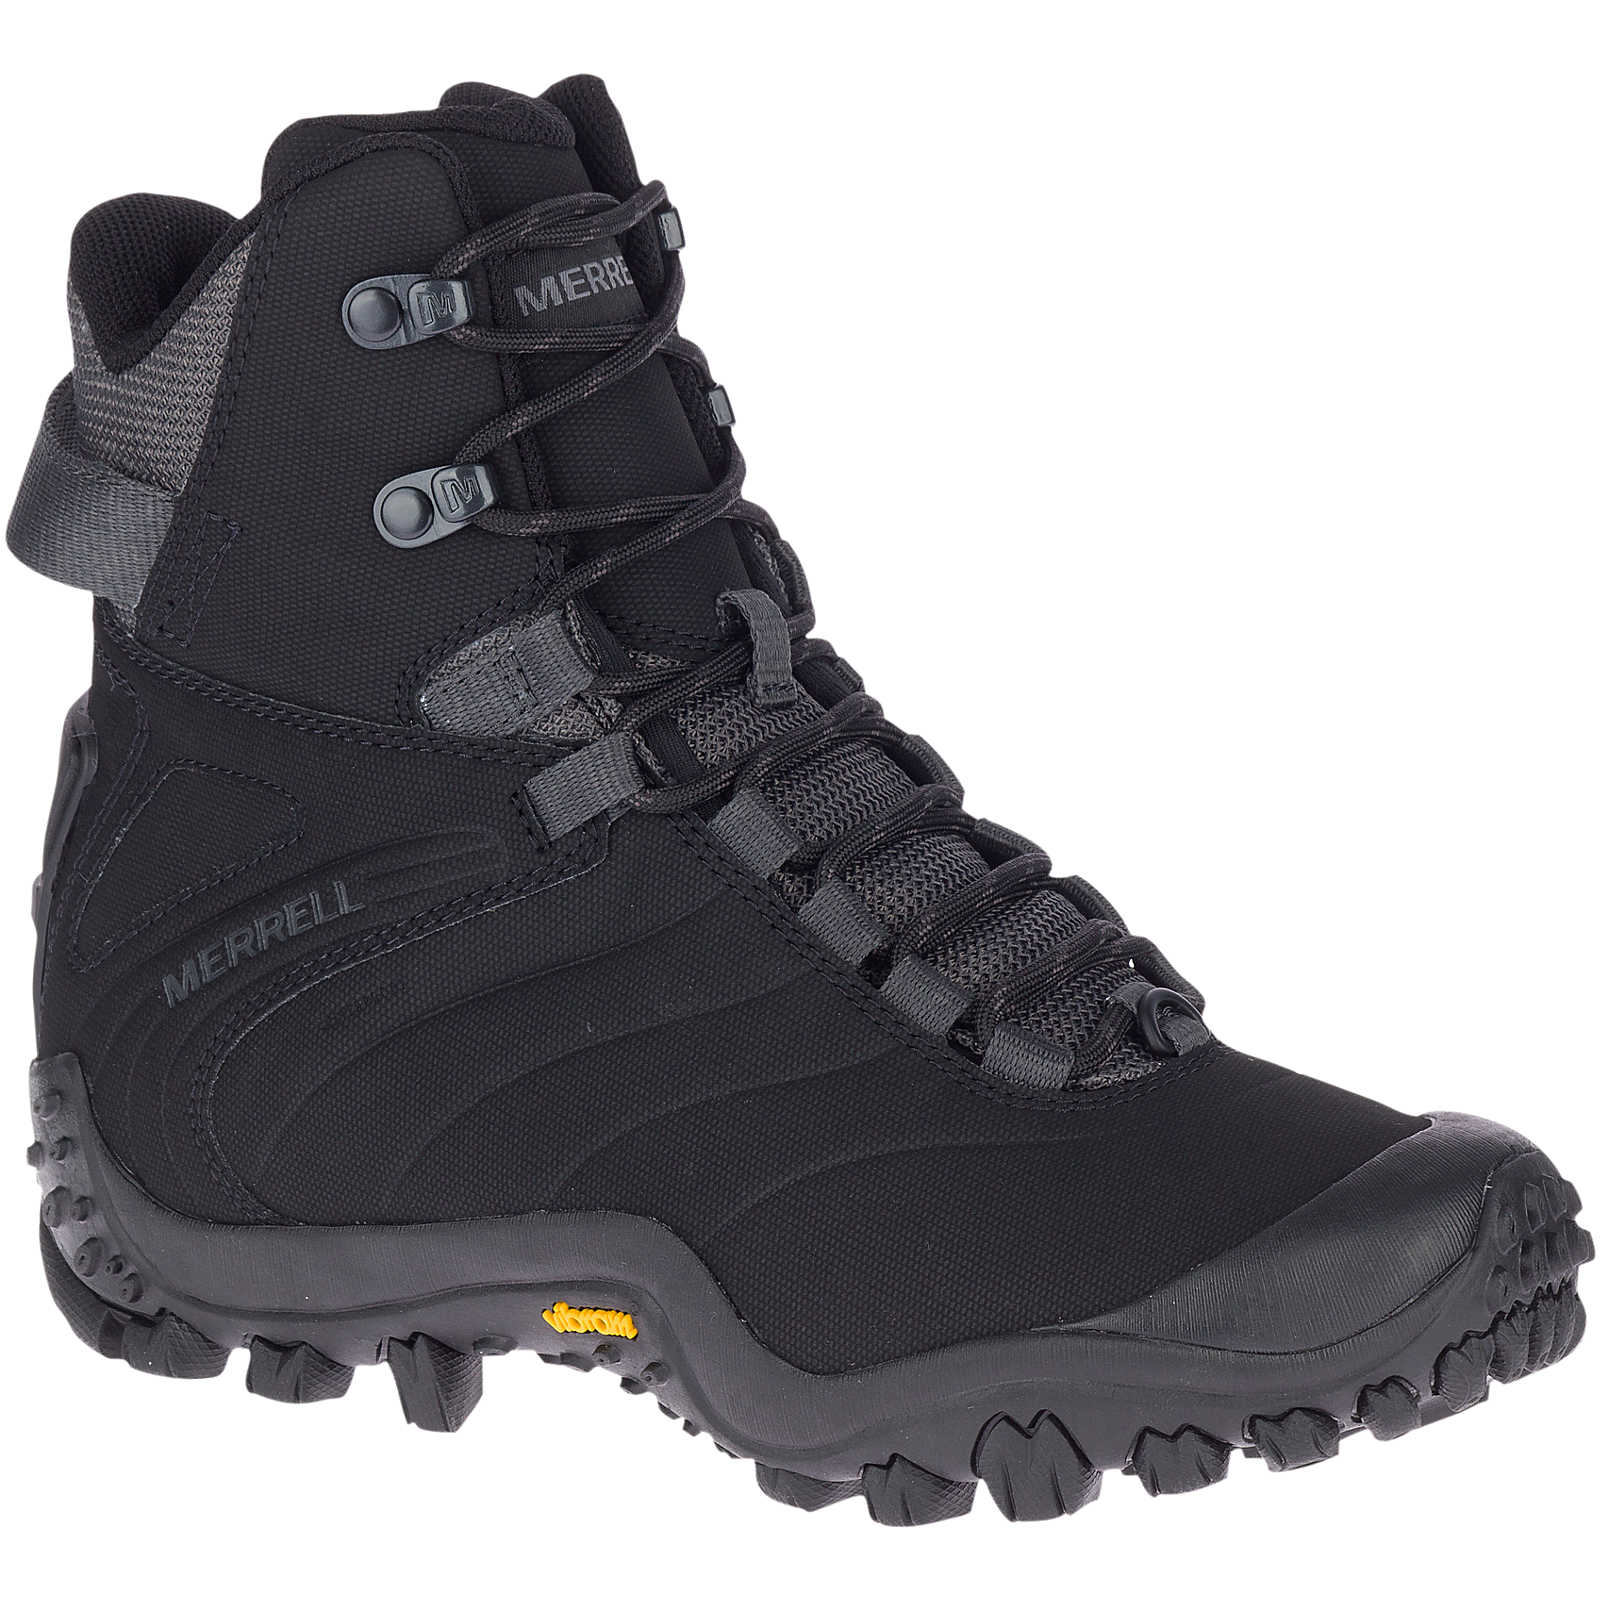 Chameleon Thermo 8 Tall Waterproof - Black